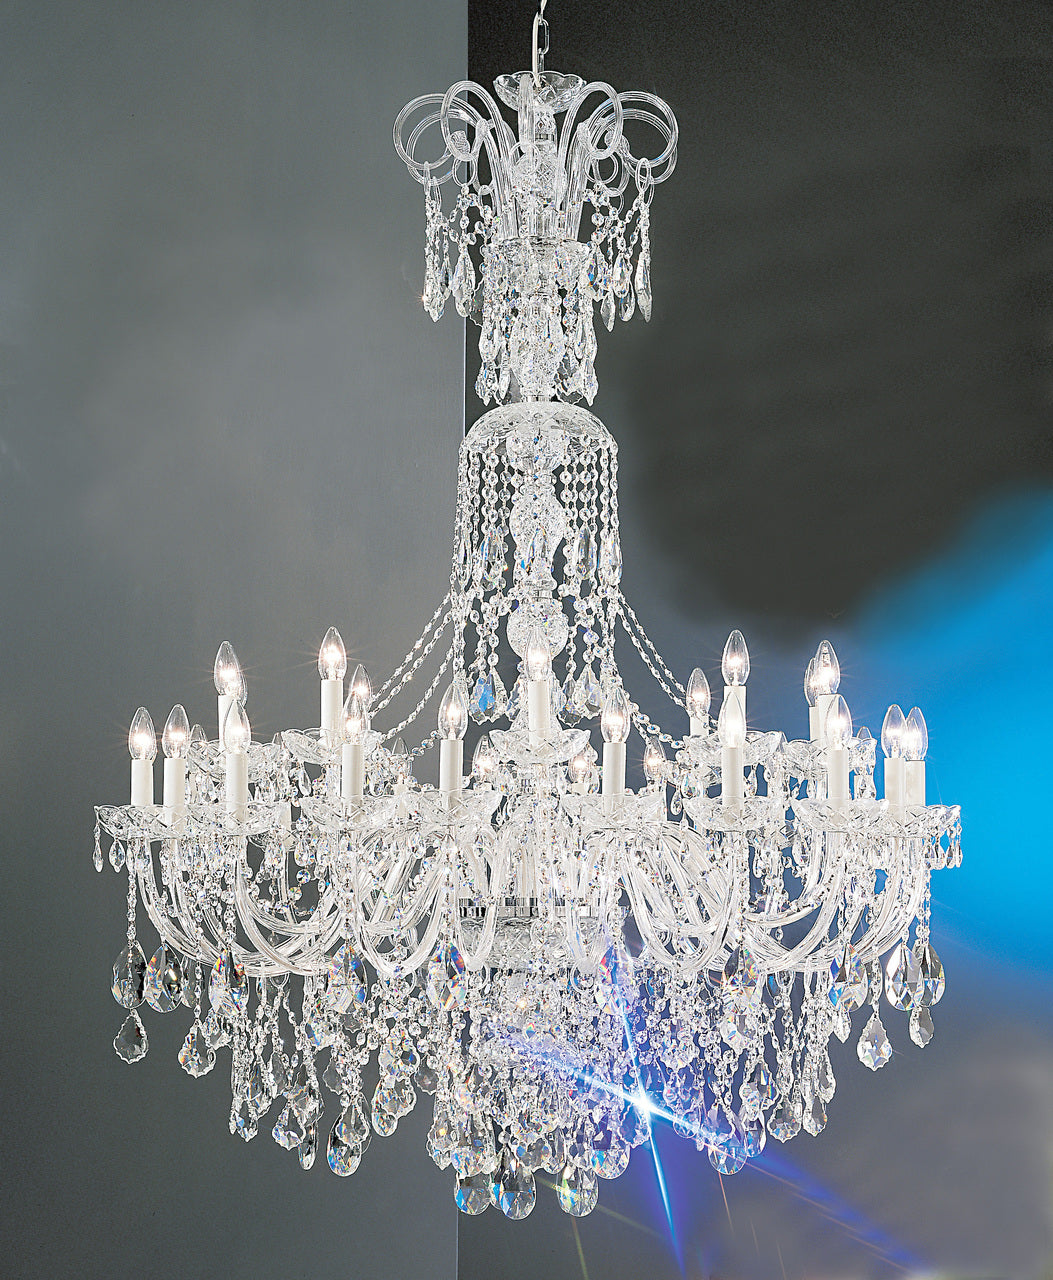 Classic Lighting 8264 G SC Bohemia Crystal/Glass Chandelier in 24k Gold (Imported from Italy)